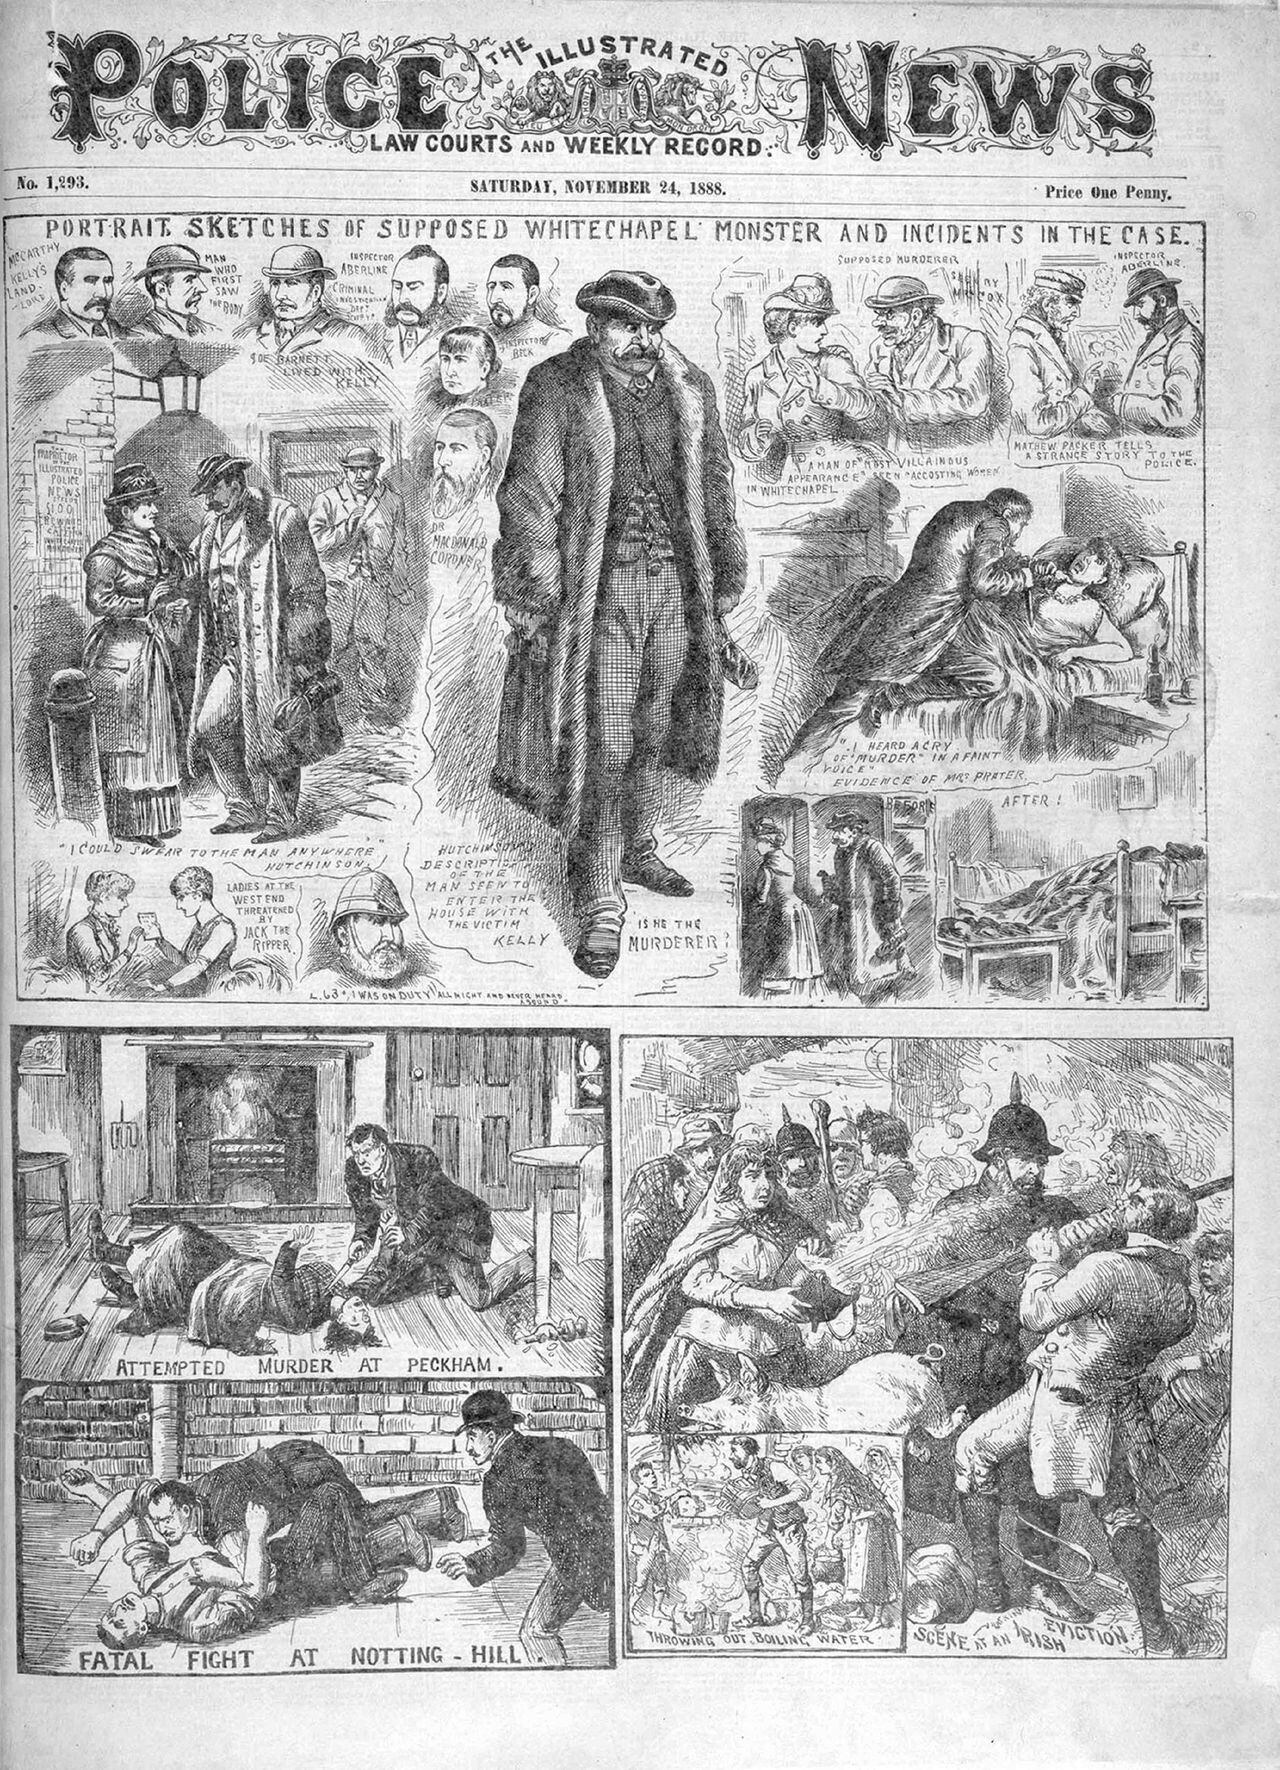 Newspaper report about the notorious unidentified serial killer known as Jack the Ripper.